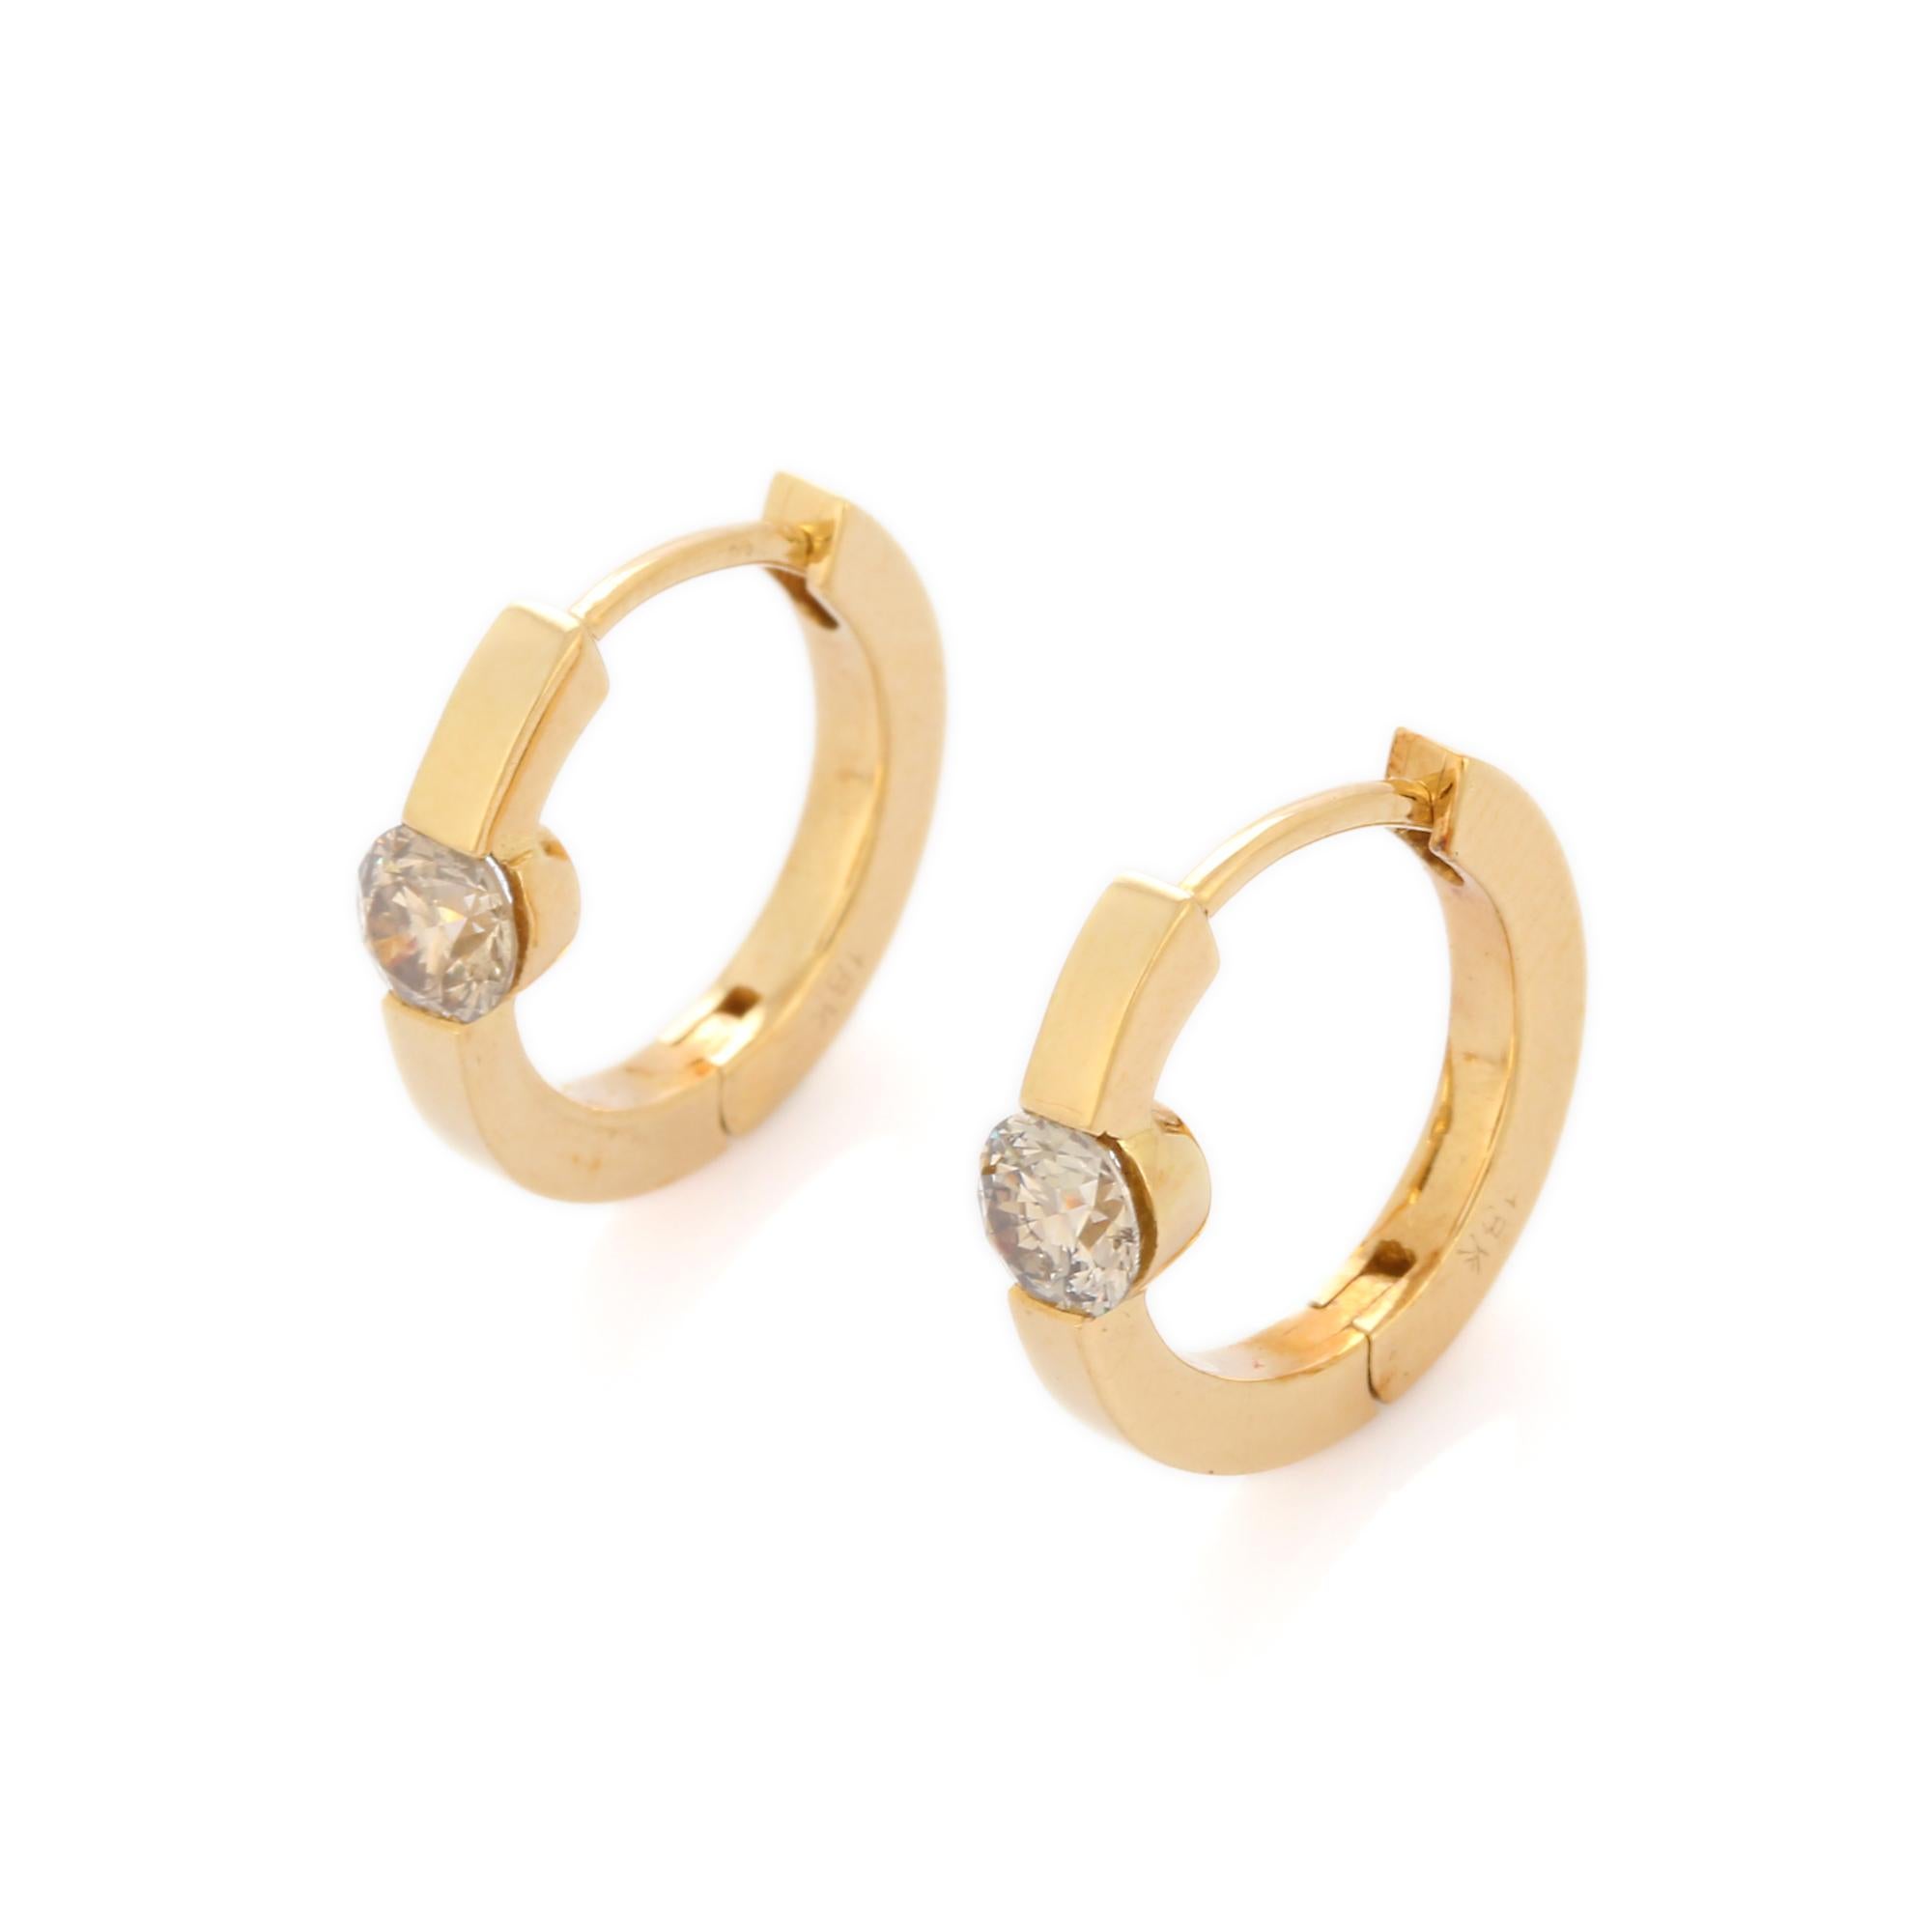 Minimalist Diamond Hoop Earrings for Women in 18K Gold to make a statement with your look. You shall need hoop earrings to make a statement with your look. These earrings create a sparkling, luxurious look featuring round cut diamond.
April